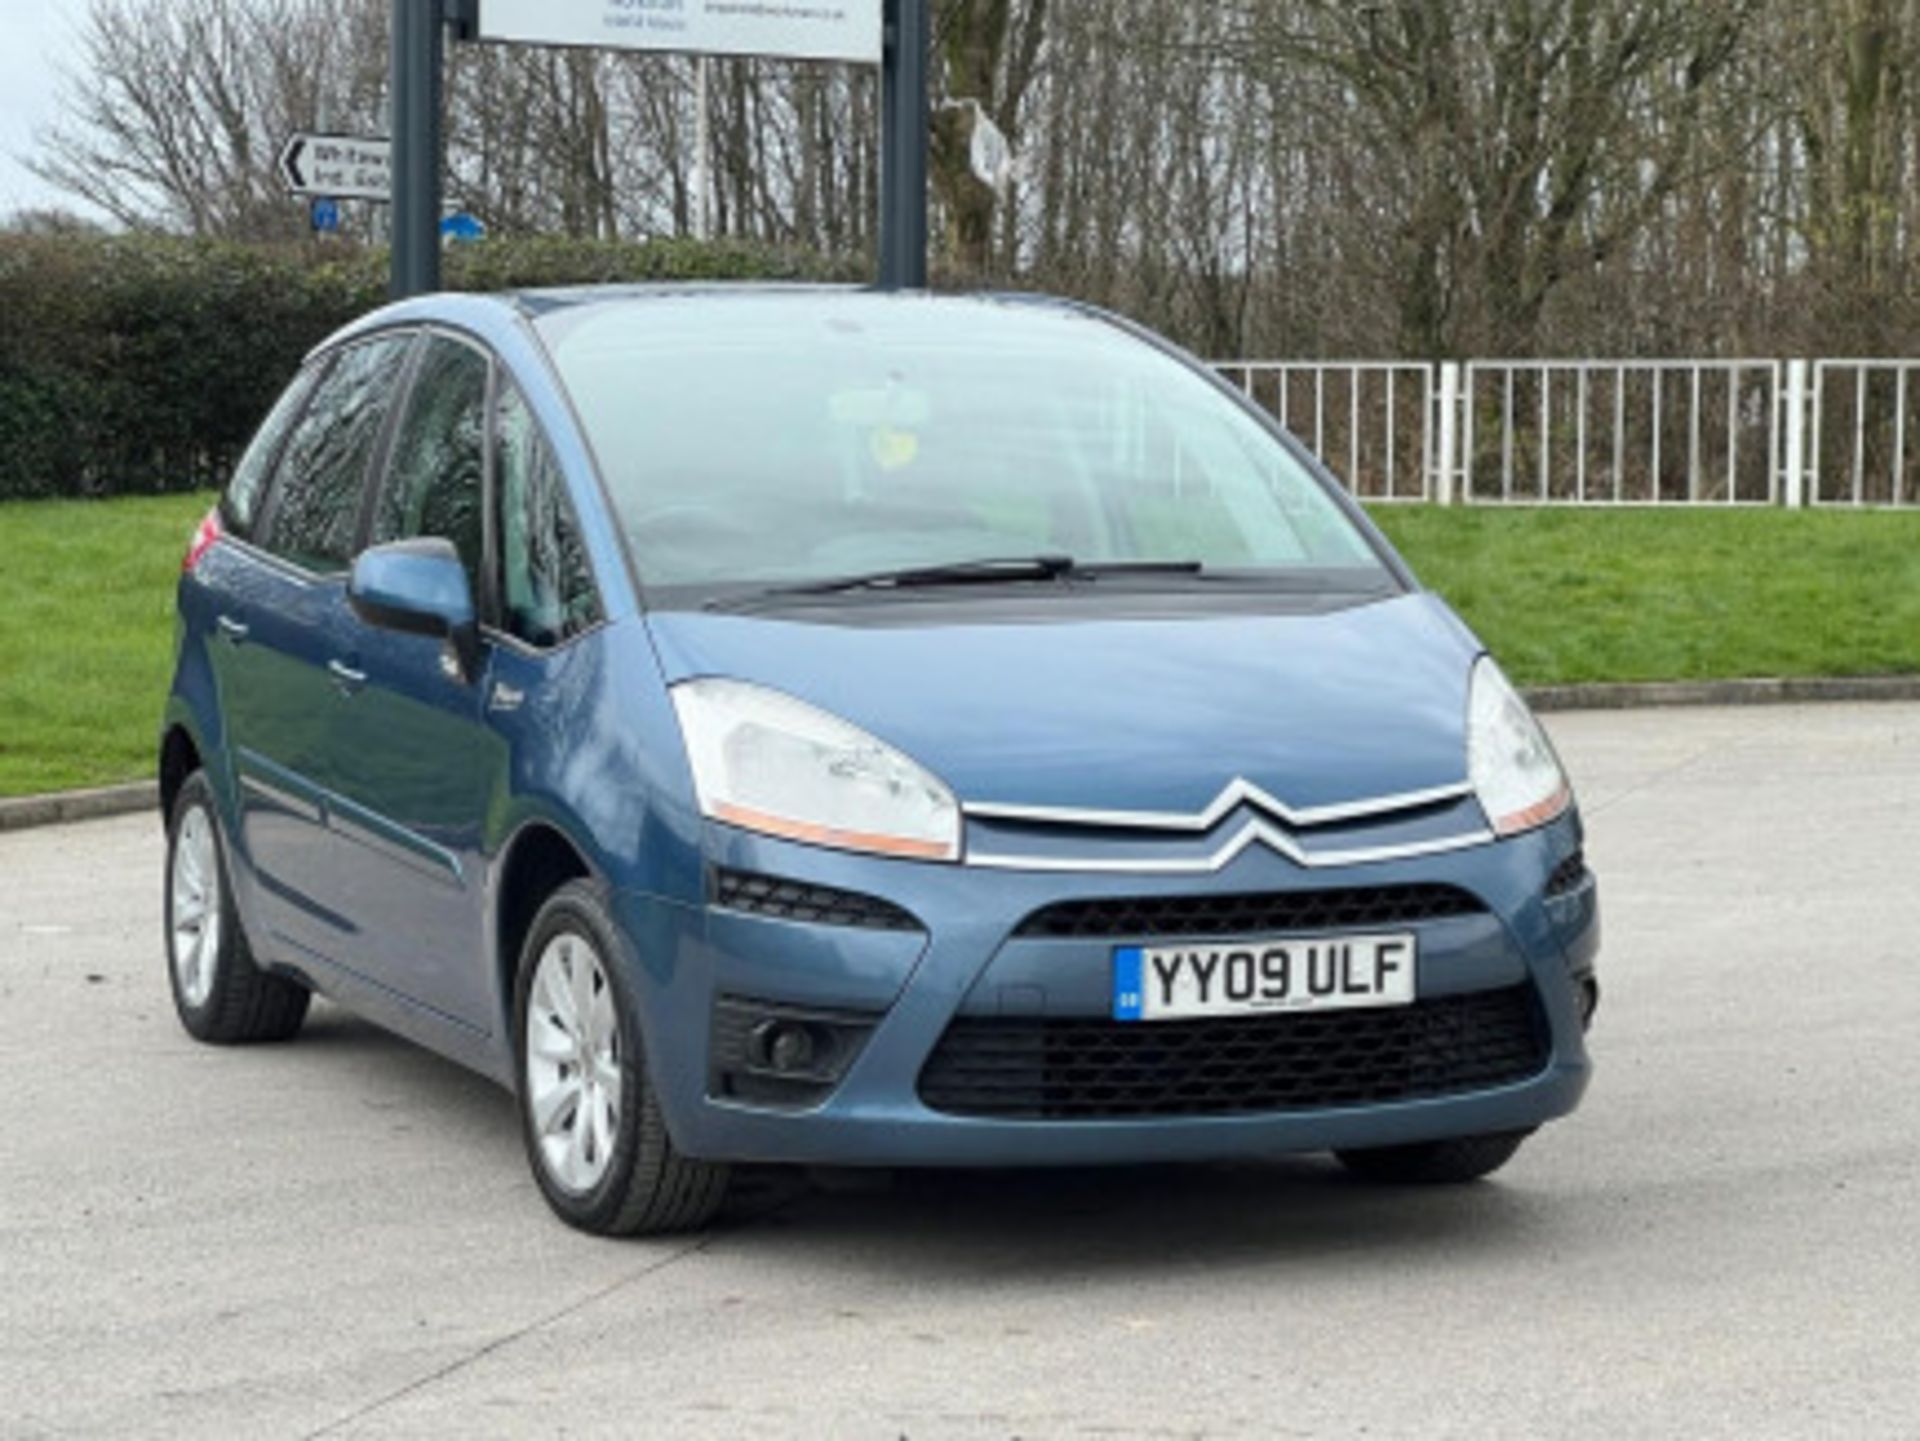 2009 CITROEN C4 PICASSO 1.6 HDI VTR+ EGS6 5DR >>--NO VAT ON HAMMER--<< - Image 62 of 123